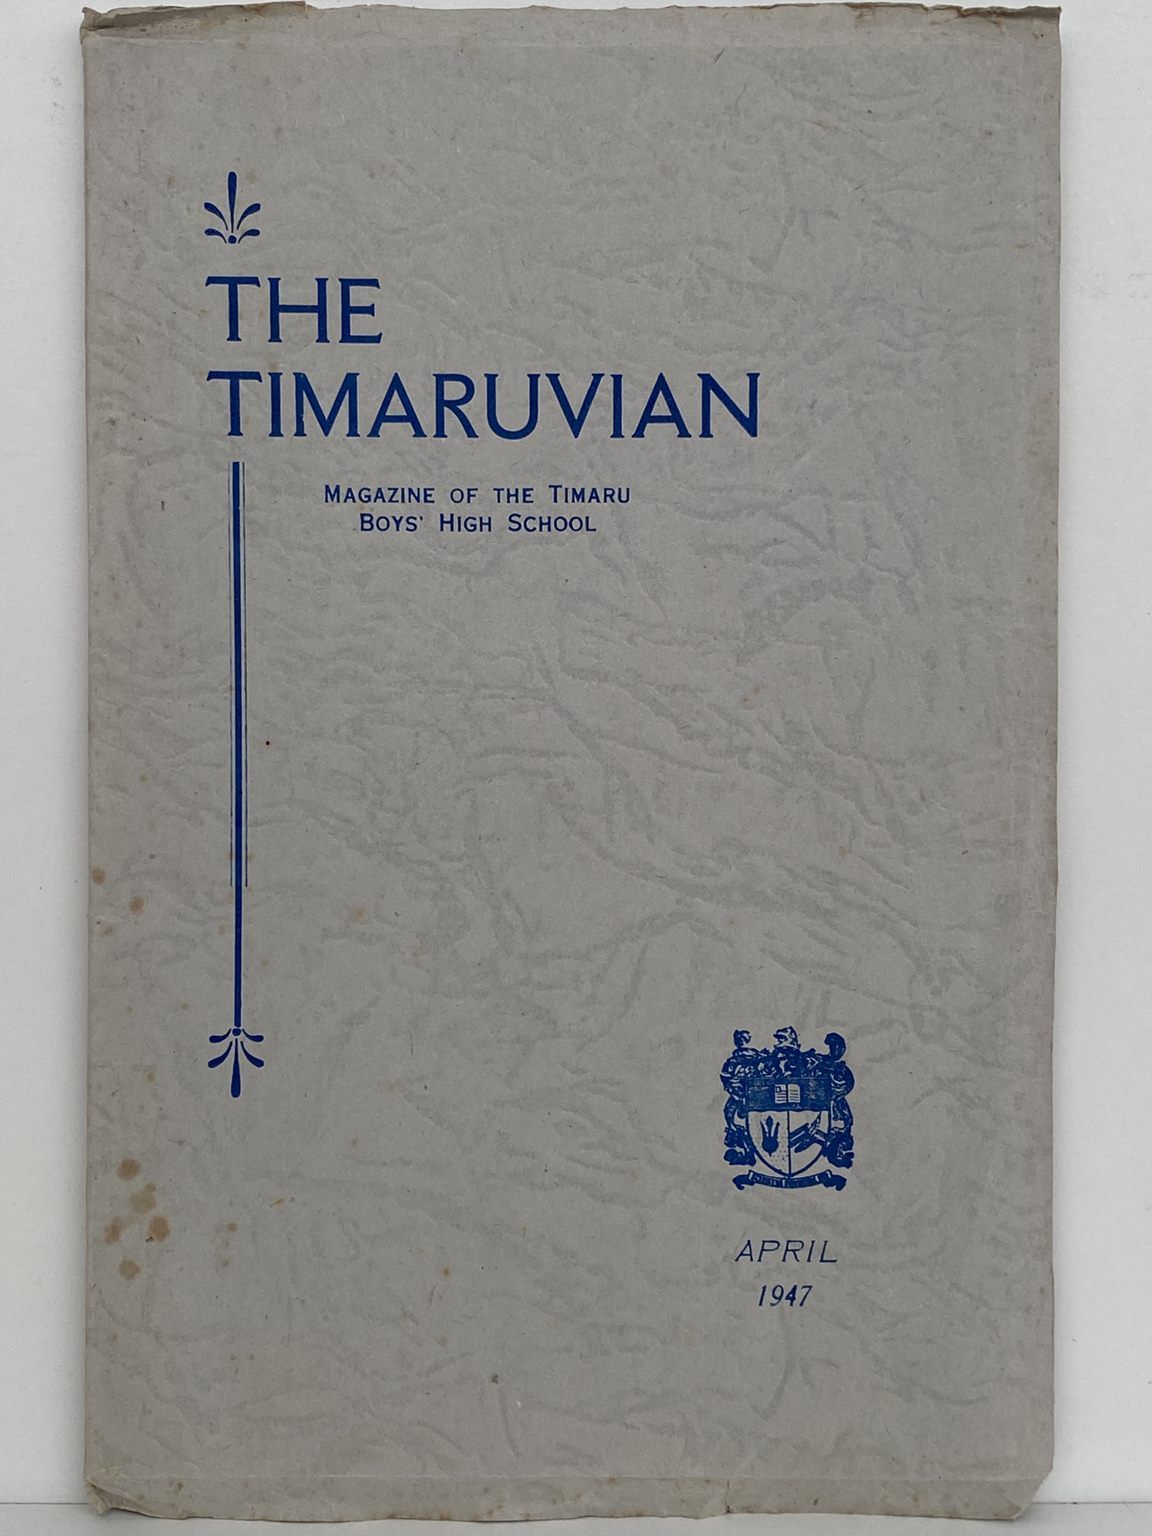 THE TIMARUVIAN: Magazine of the Timaru Boys' High School and its Old Boys' Association 1947